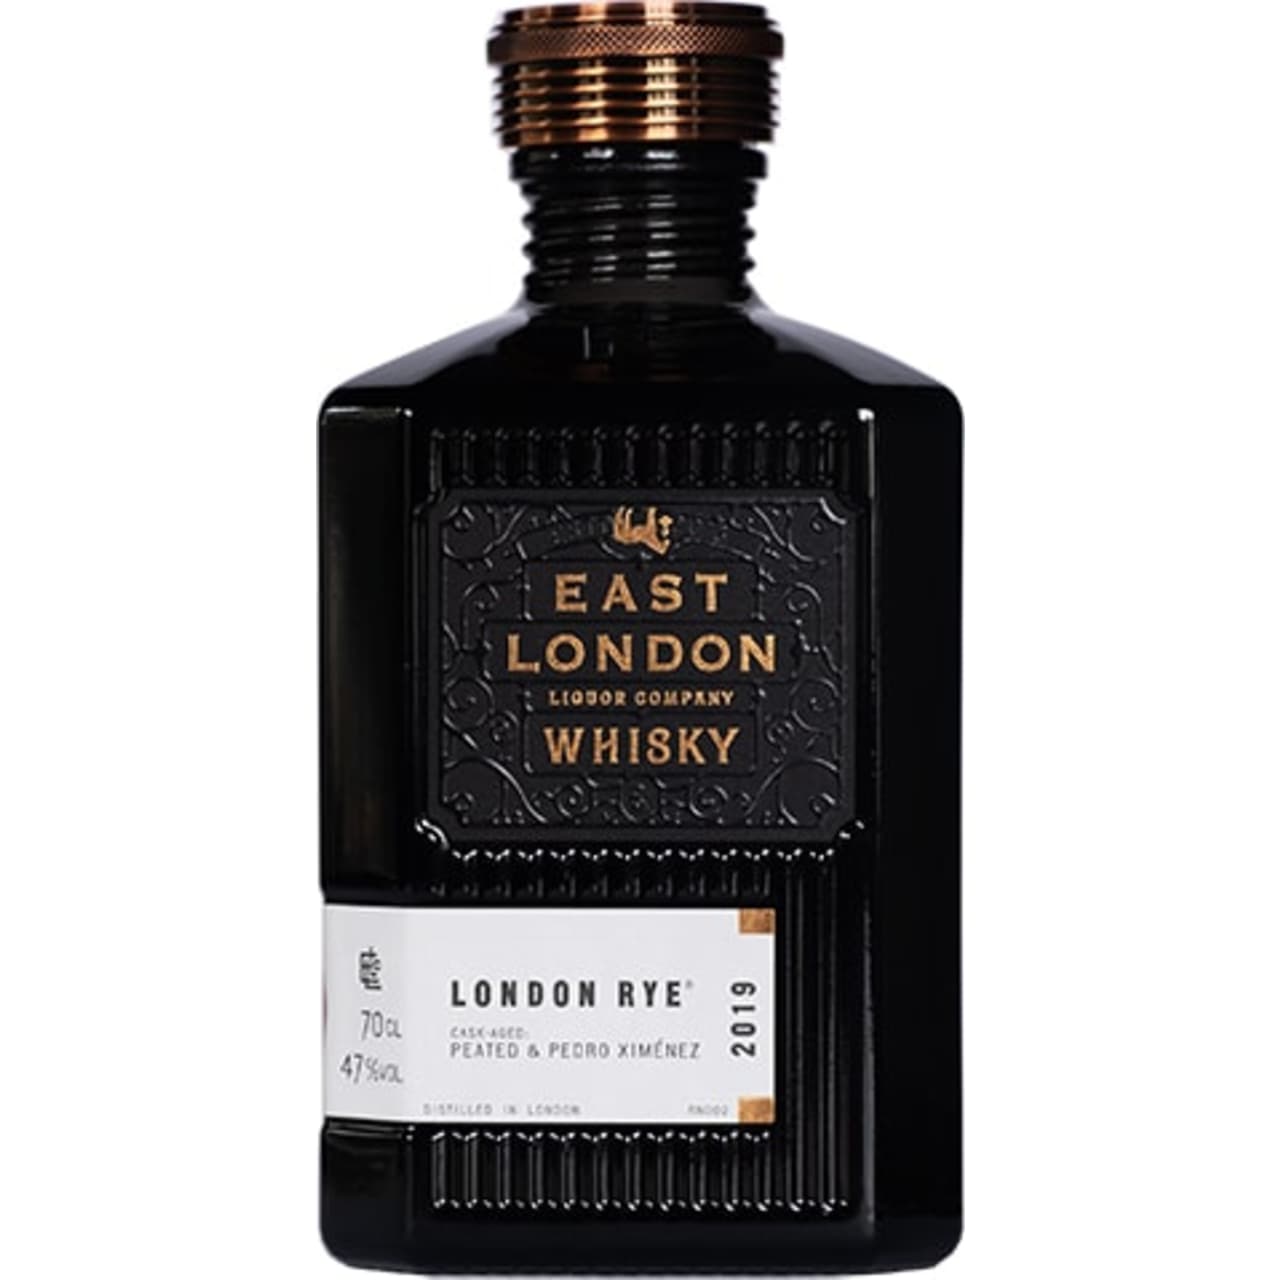 East London Liquor Company's London Rye Whisky has been matured in a combination of different casks, including virgin French oak, chestnut, shaved-toasted-recharred, sherry and bourbon casks.